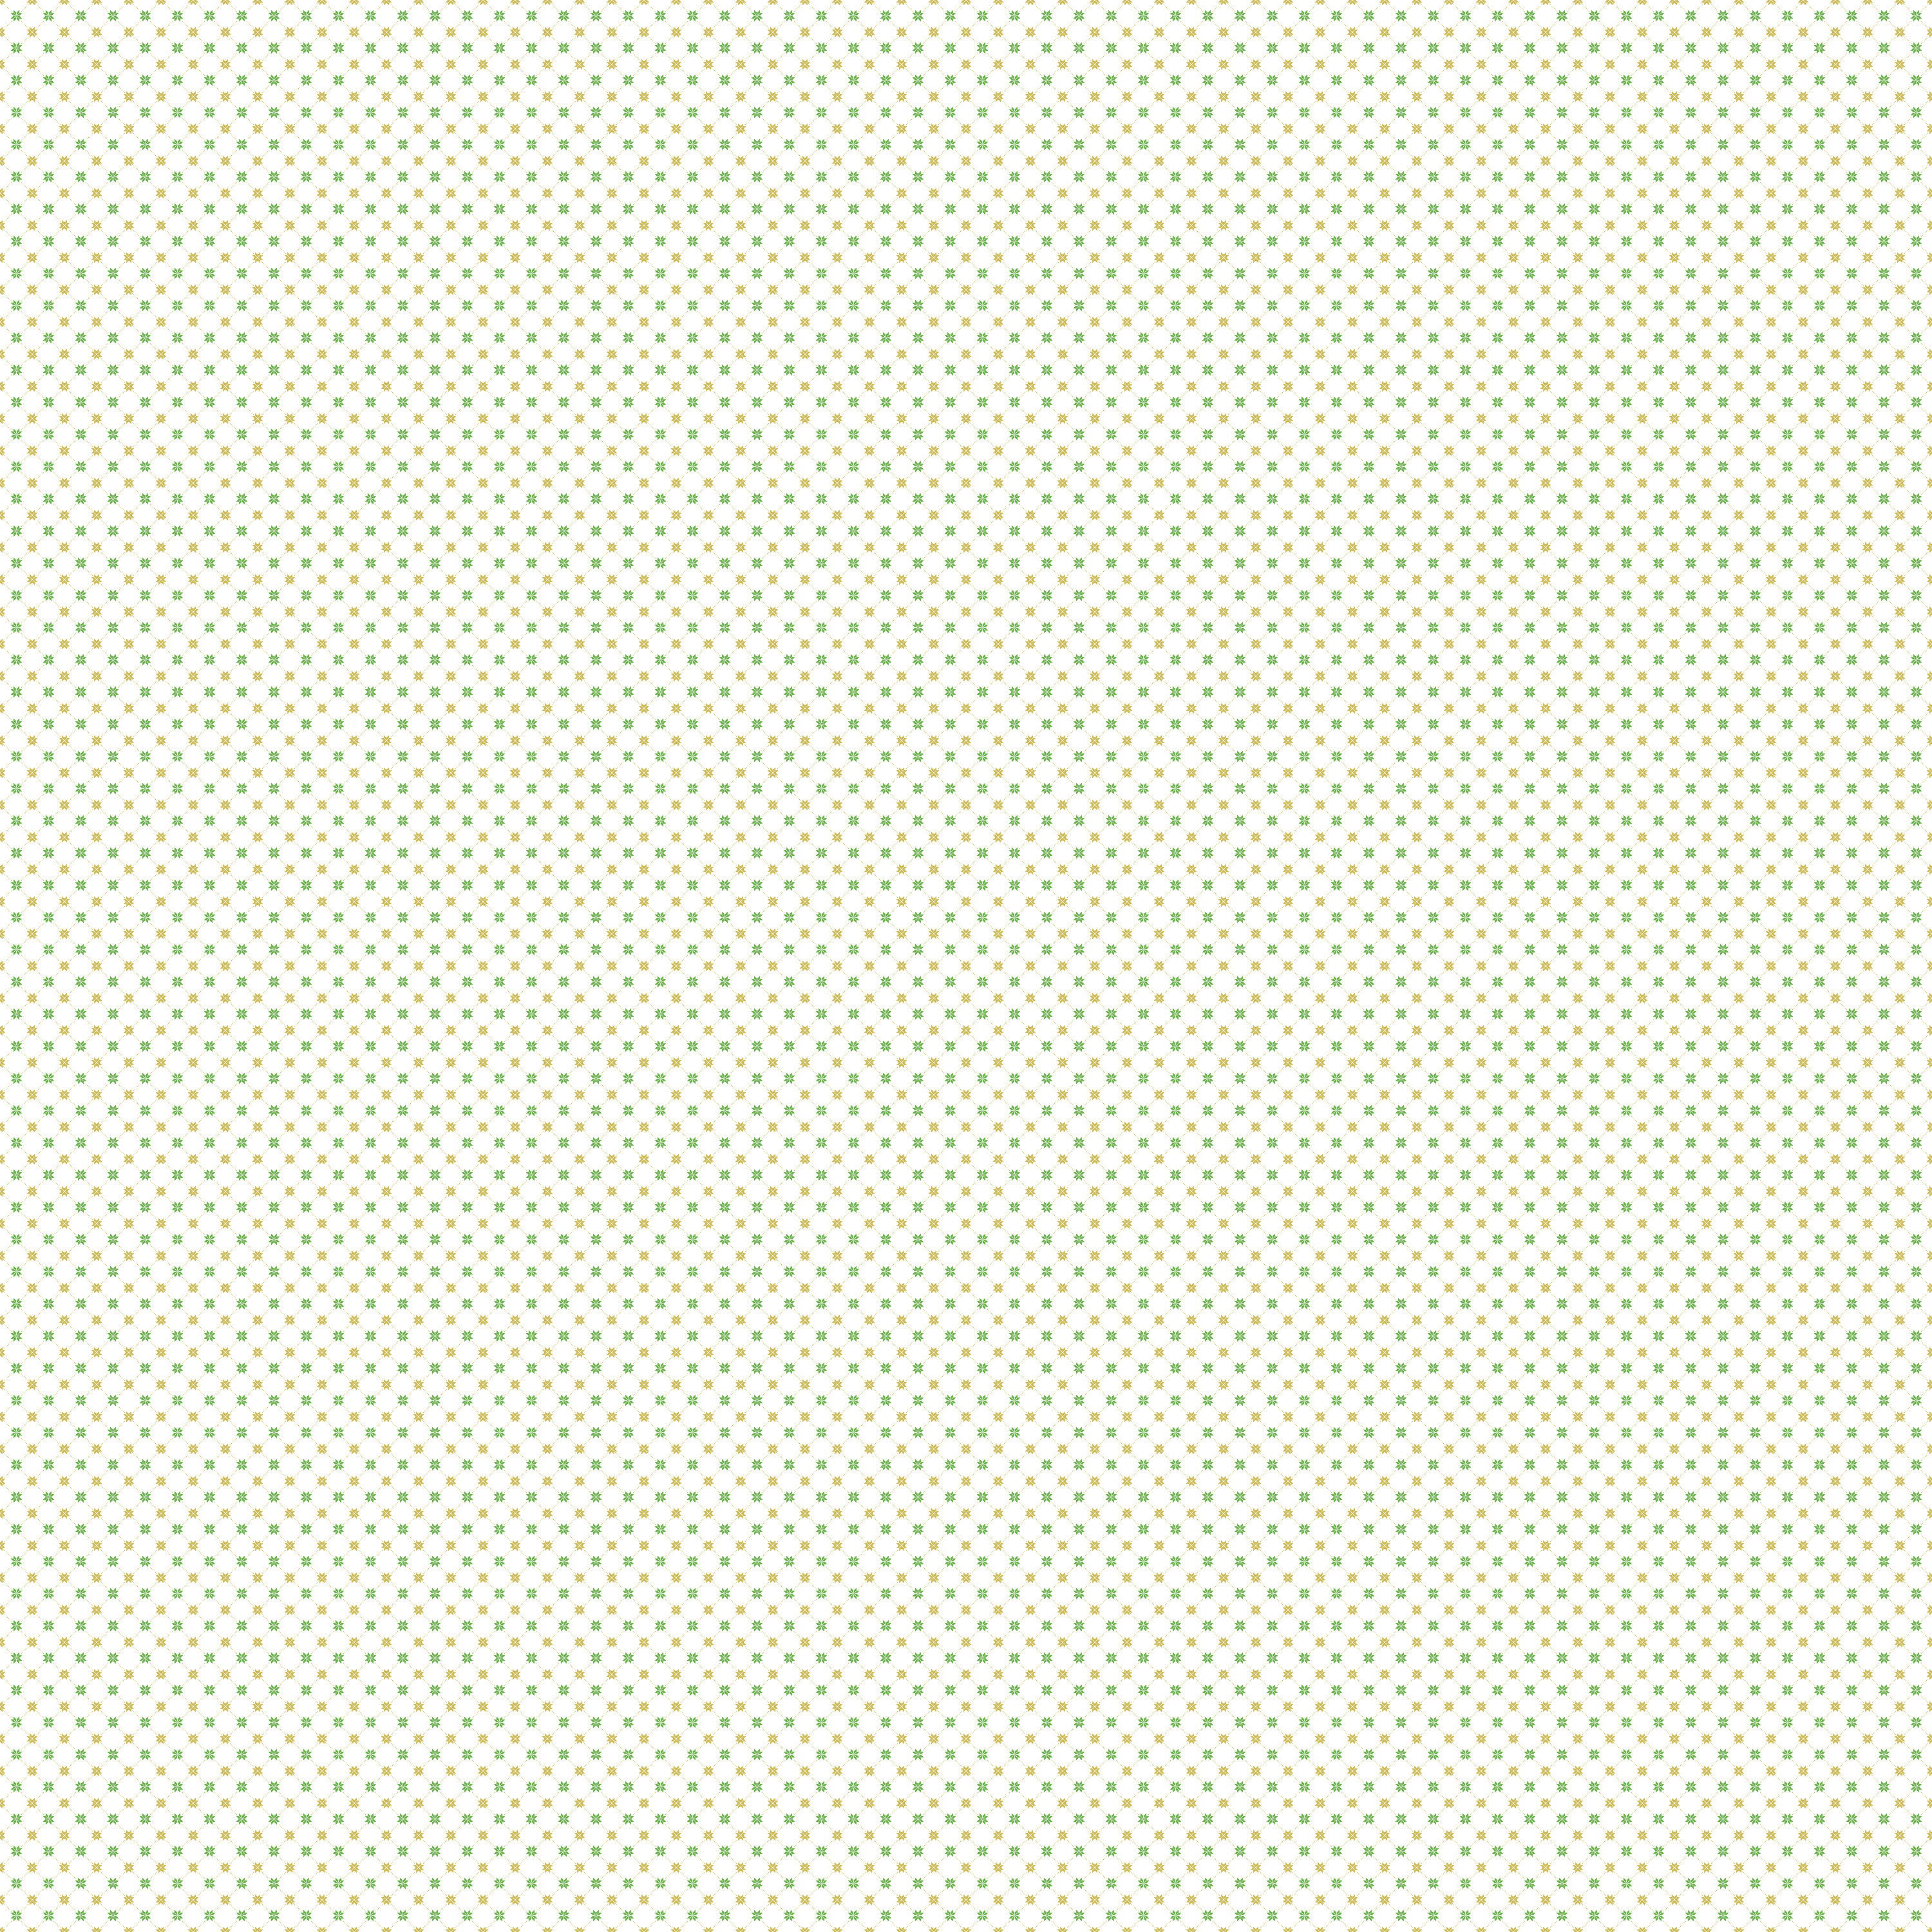 Free Christmas Backgrounds Wallpapers Photoshop Patterns